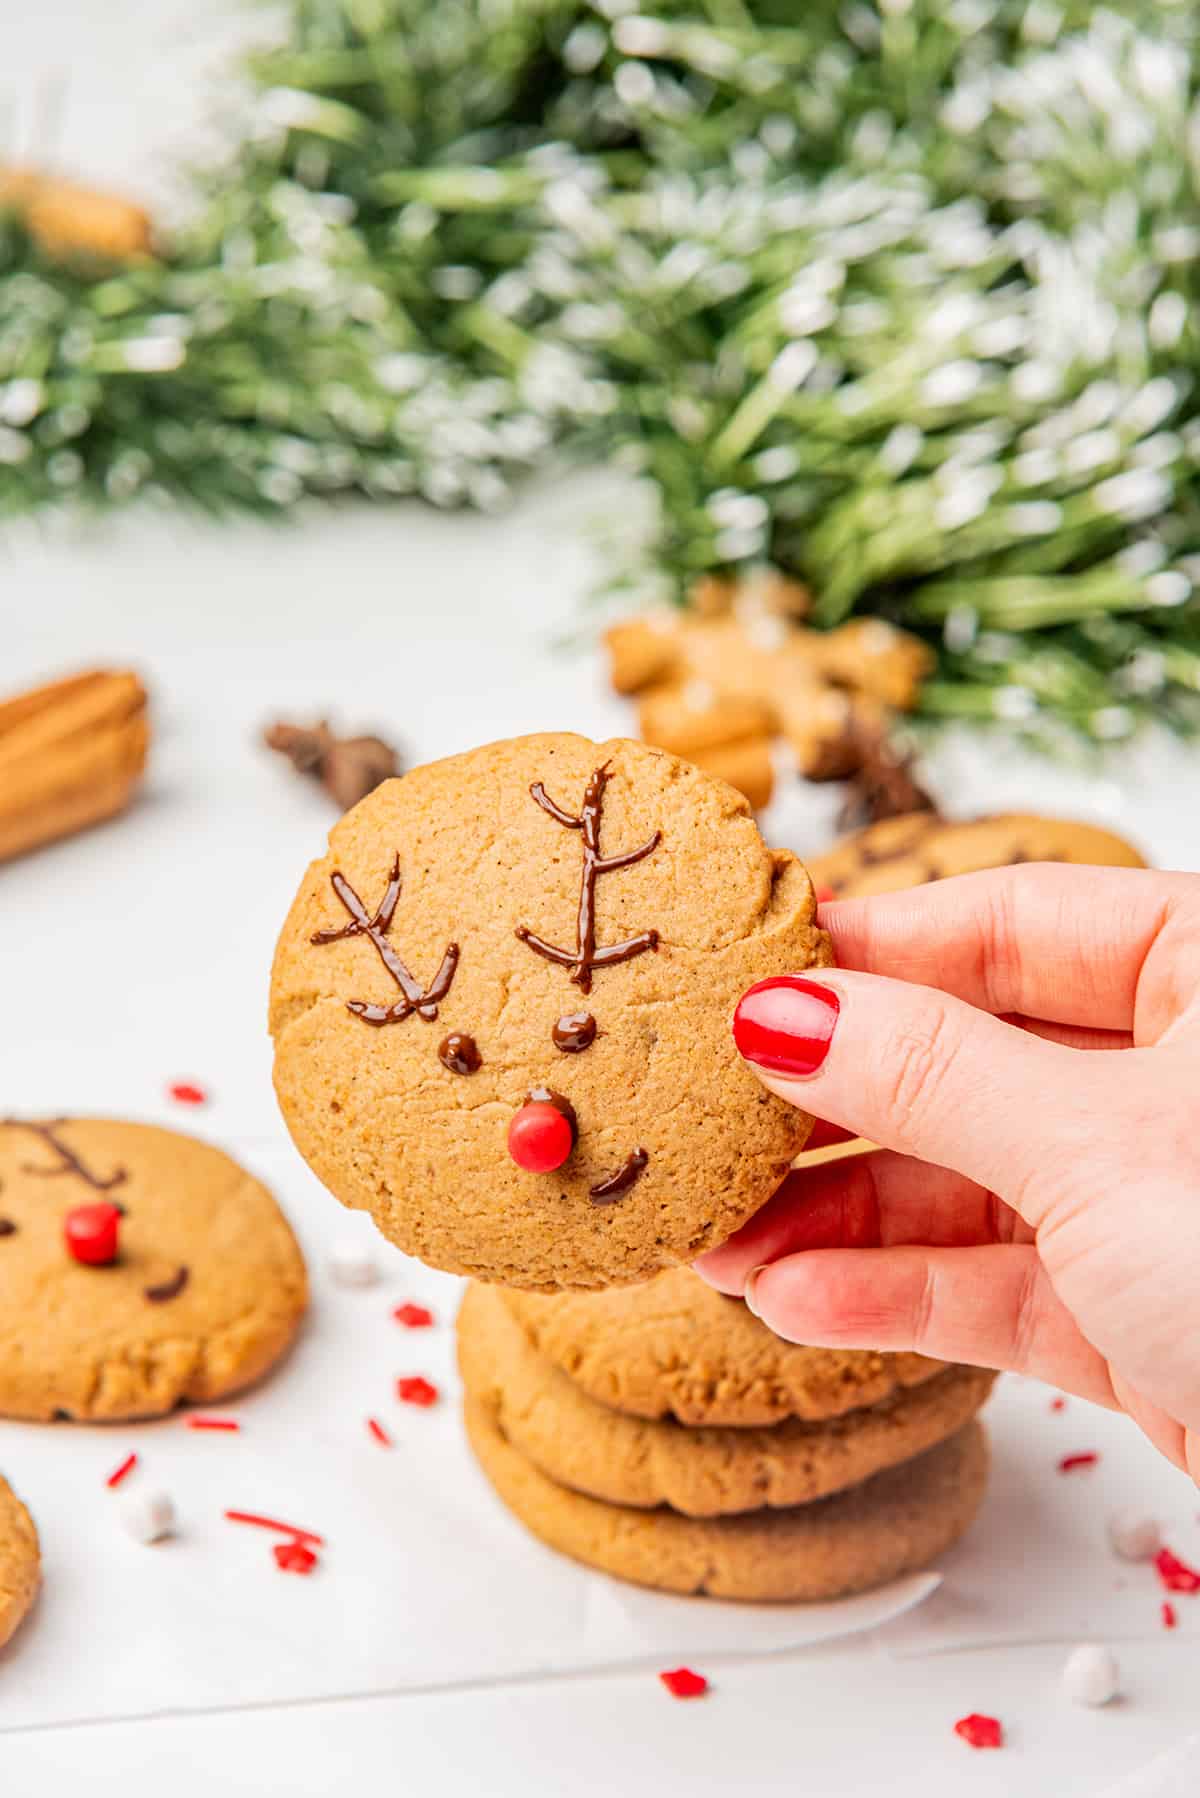 A hand holding a decorated gingerbread reindeer cookie.